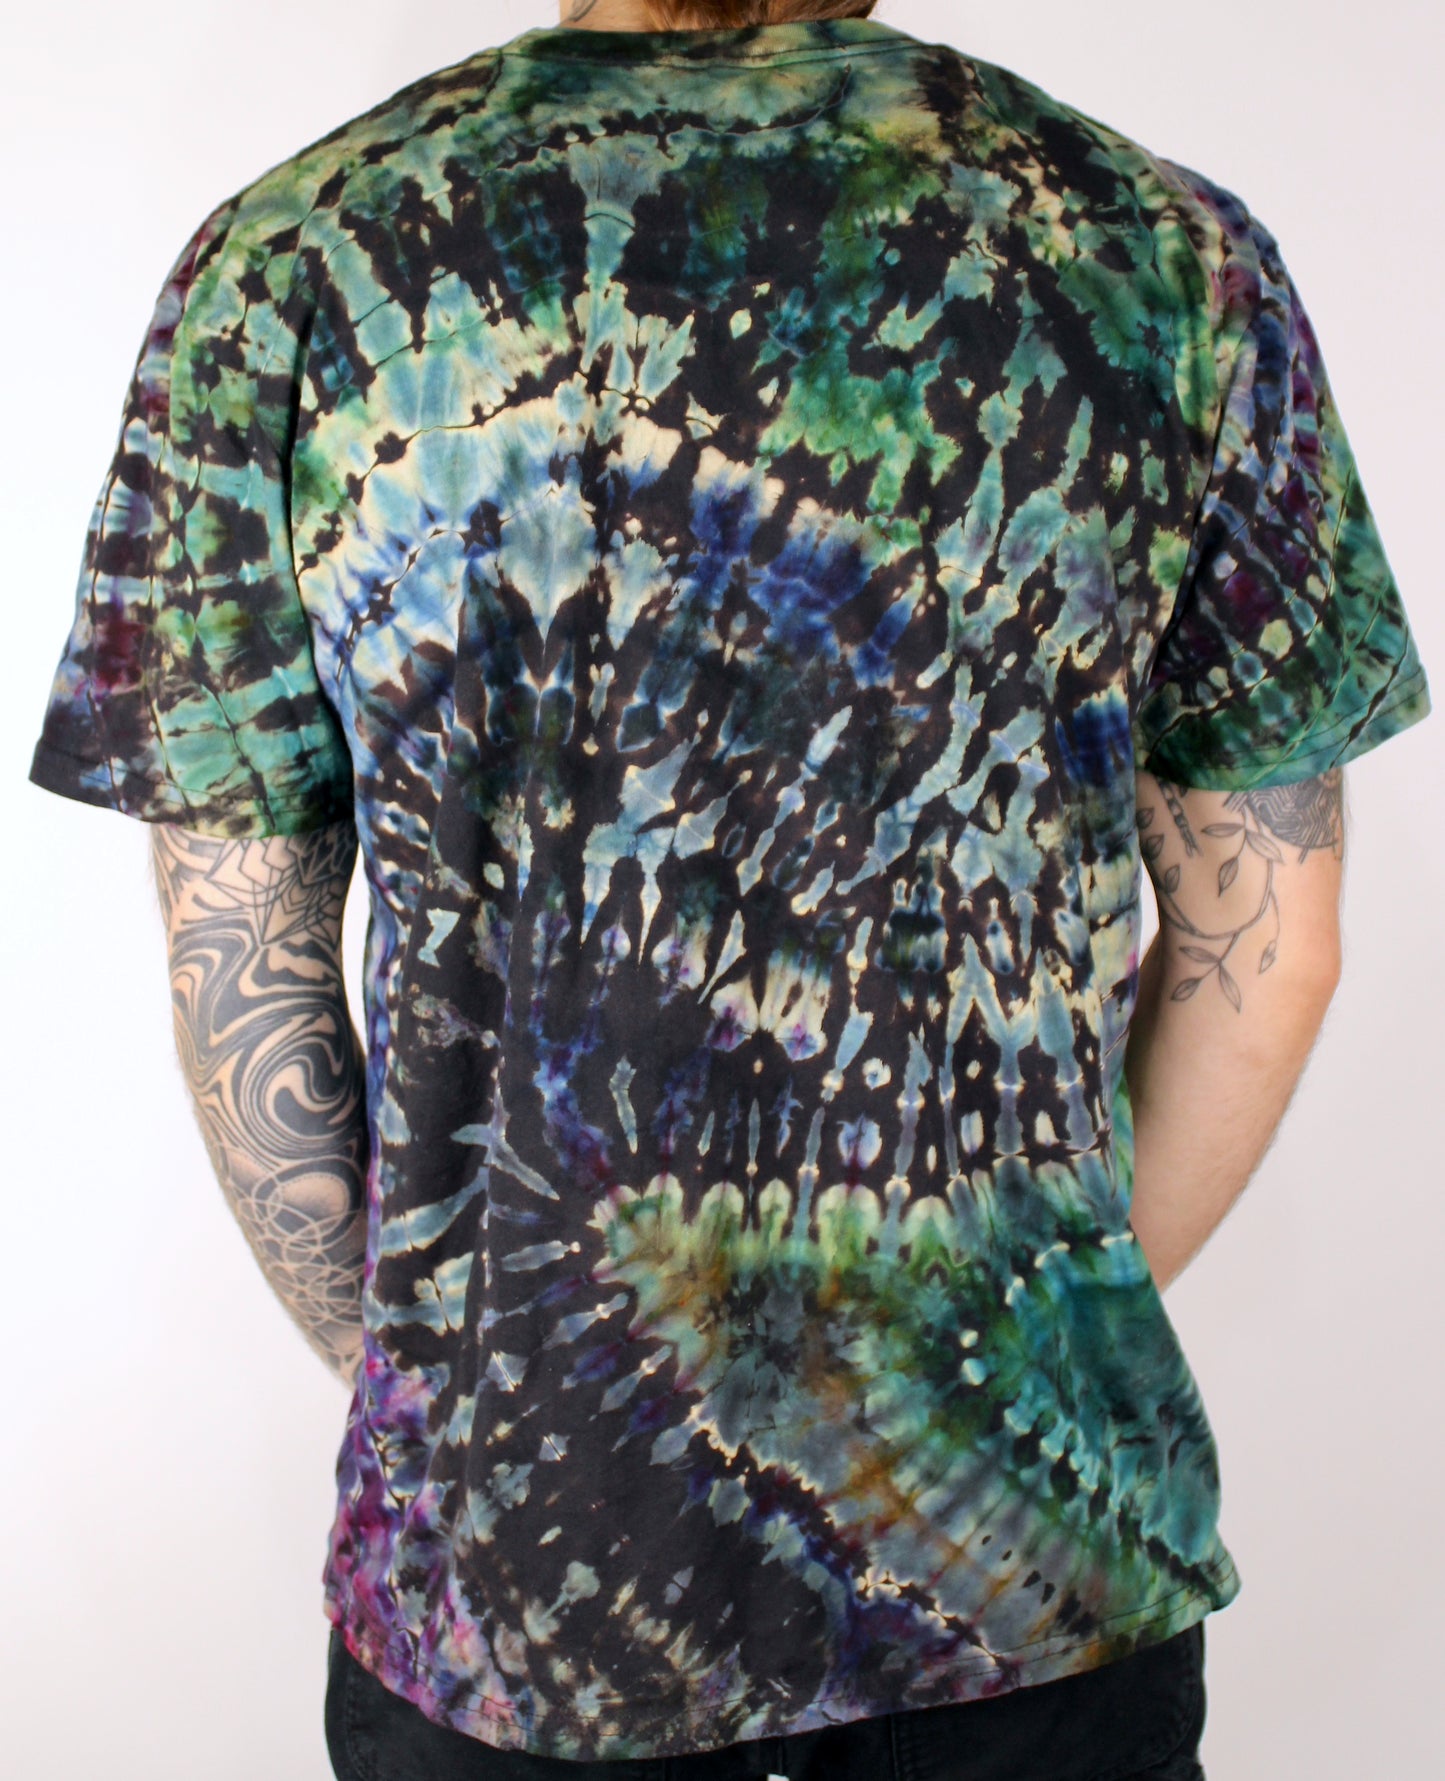 XL - “Chaos Theory” Reverse Dyed Tee Shirt